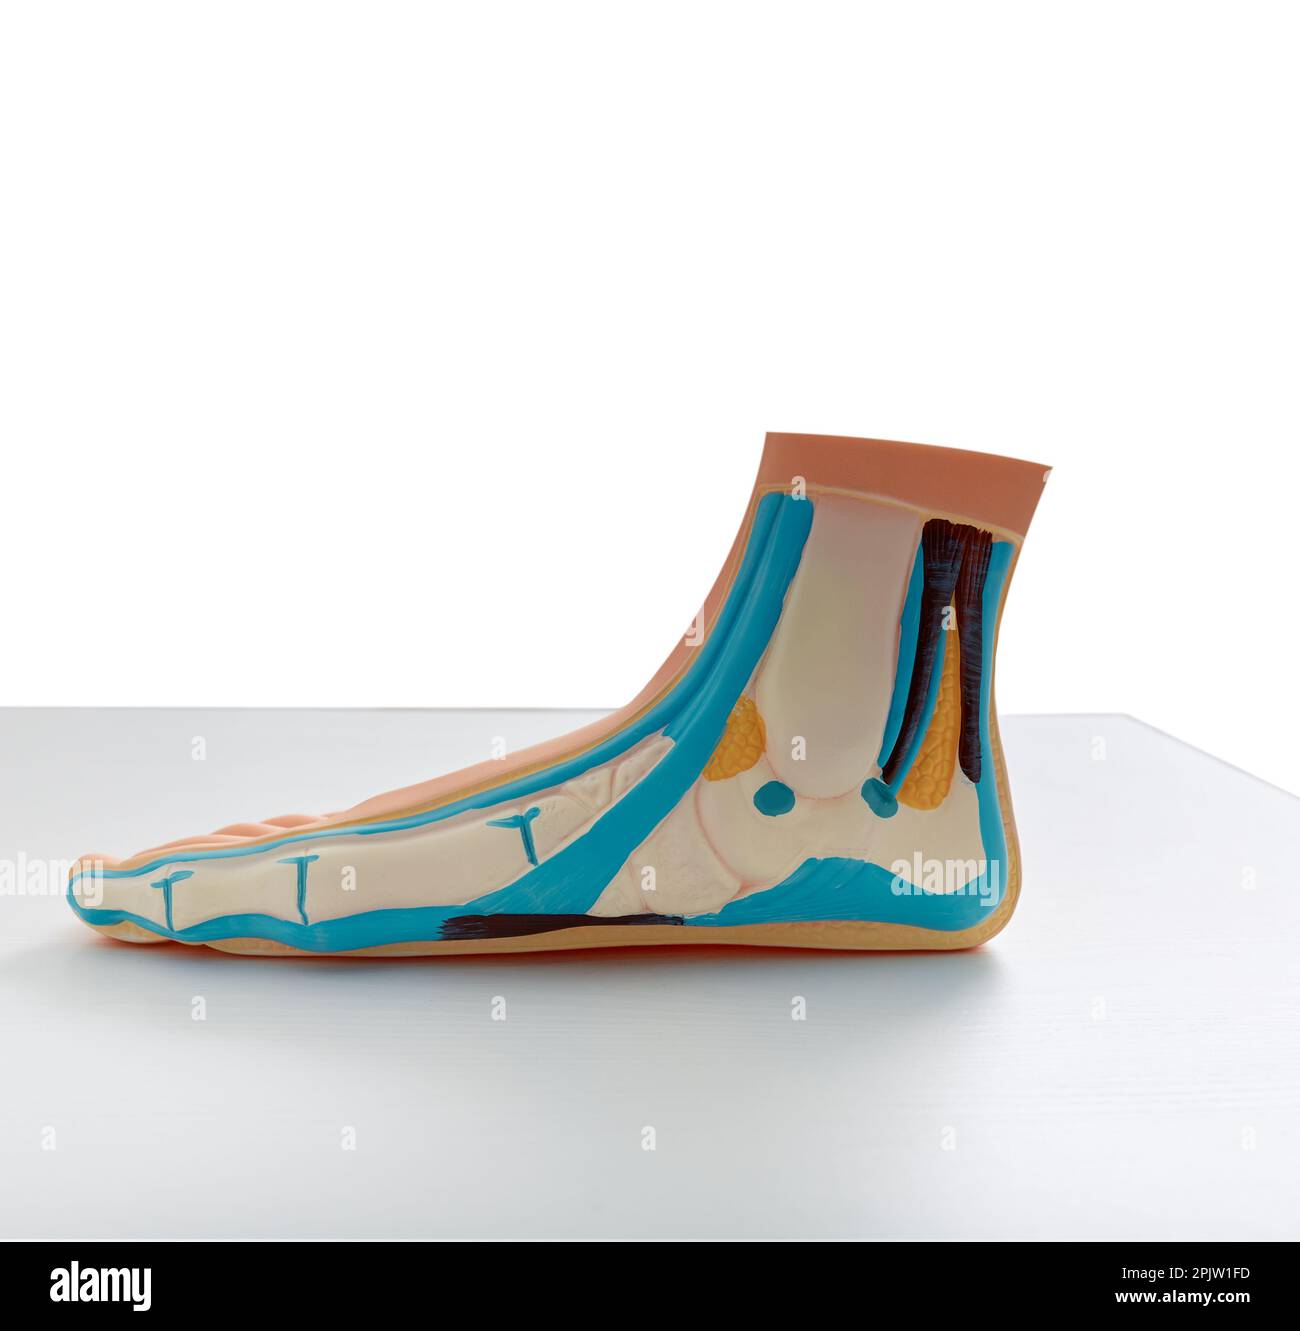 Flatfoot. Anatomical or educational model of foot with flat feet ...